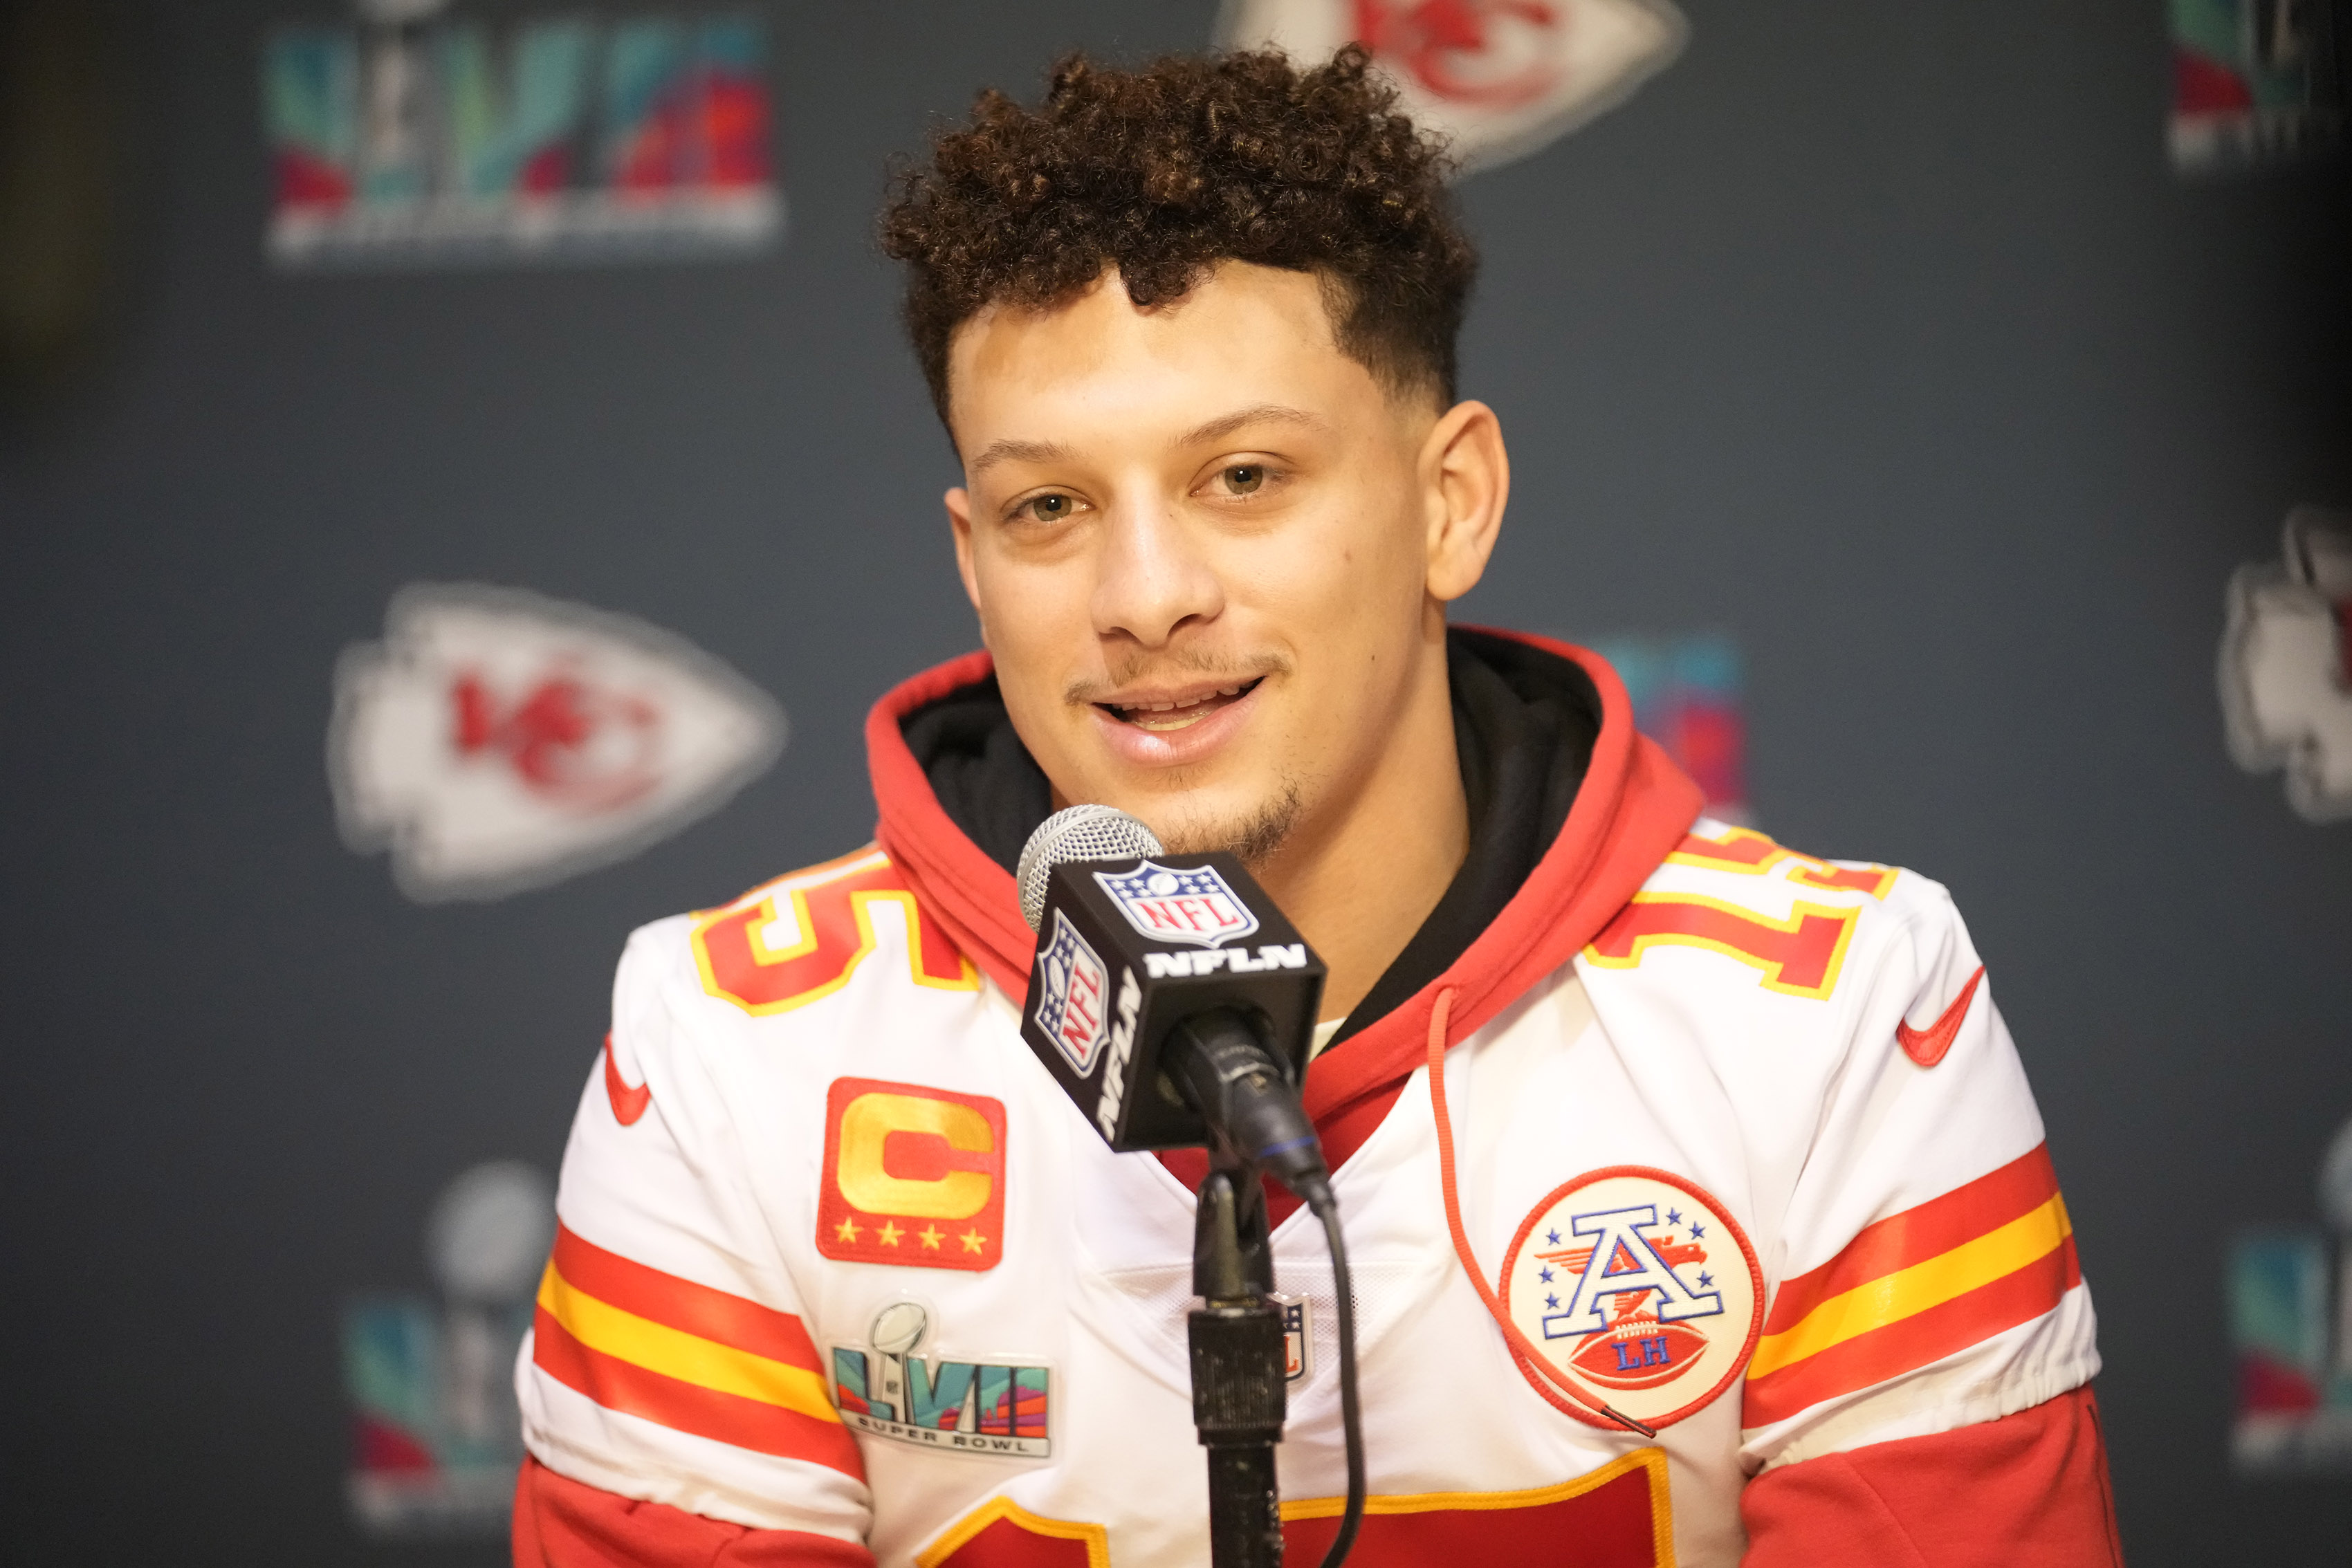 Tips and advice for betting Super Bowl props Patrick Mahomes Kansas City Chiefs